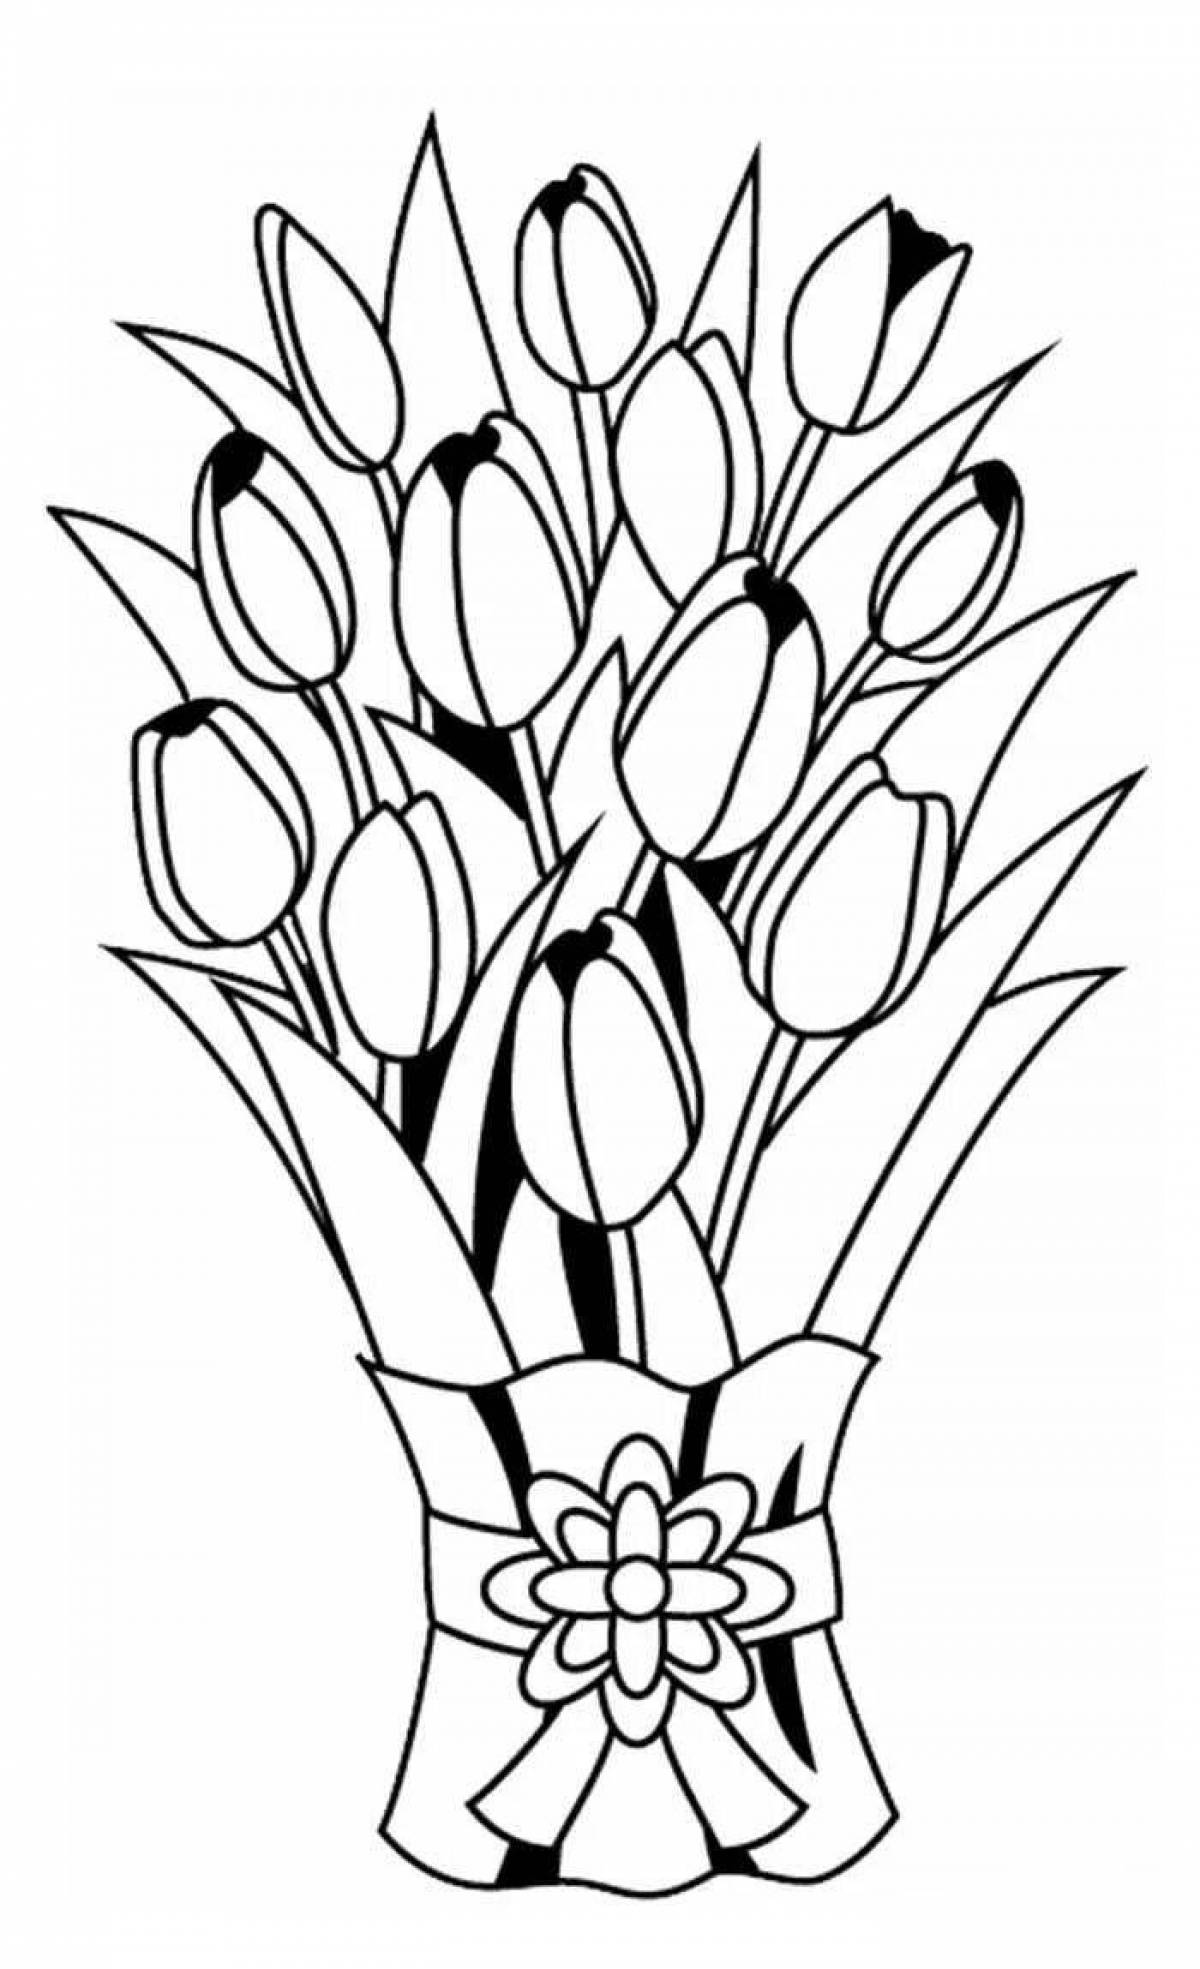 Coloring book luminous tulips for March 8